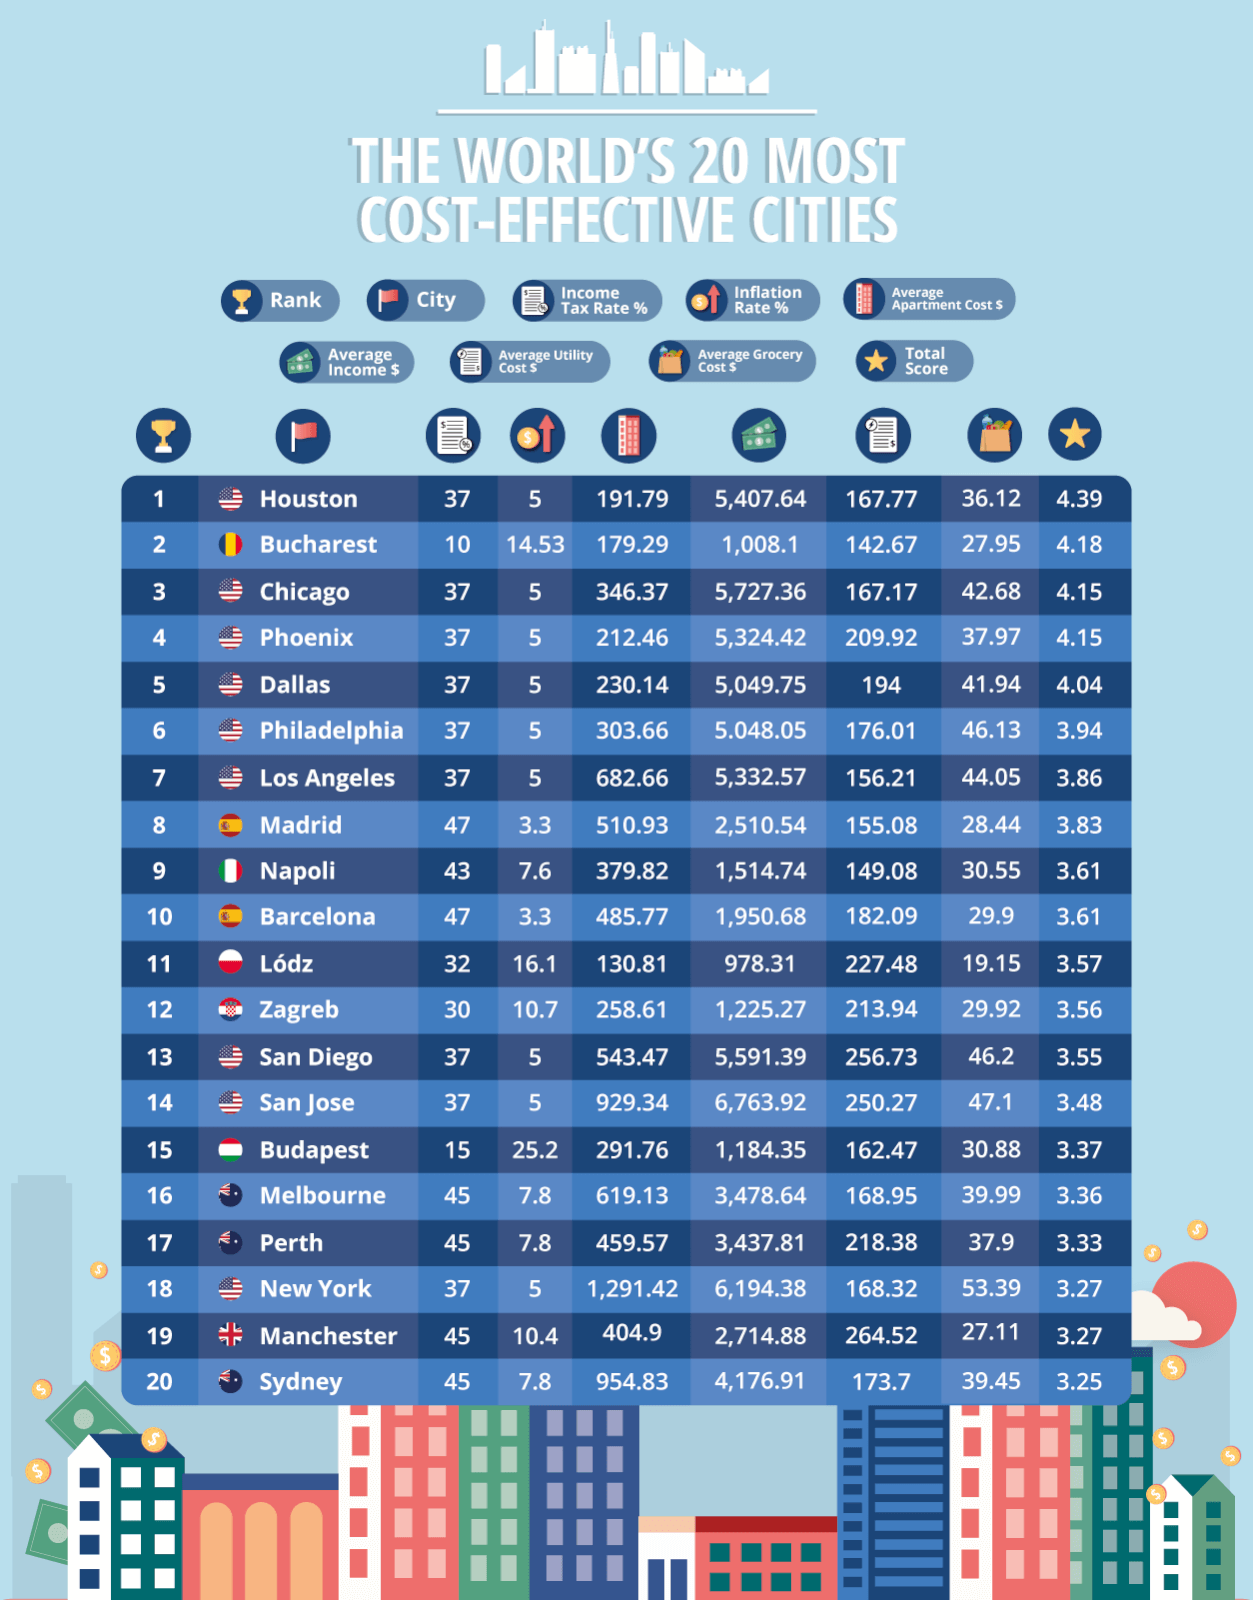 Table showing the world's 20 most cost-effective cities.